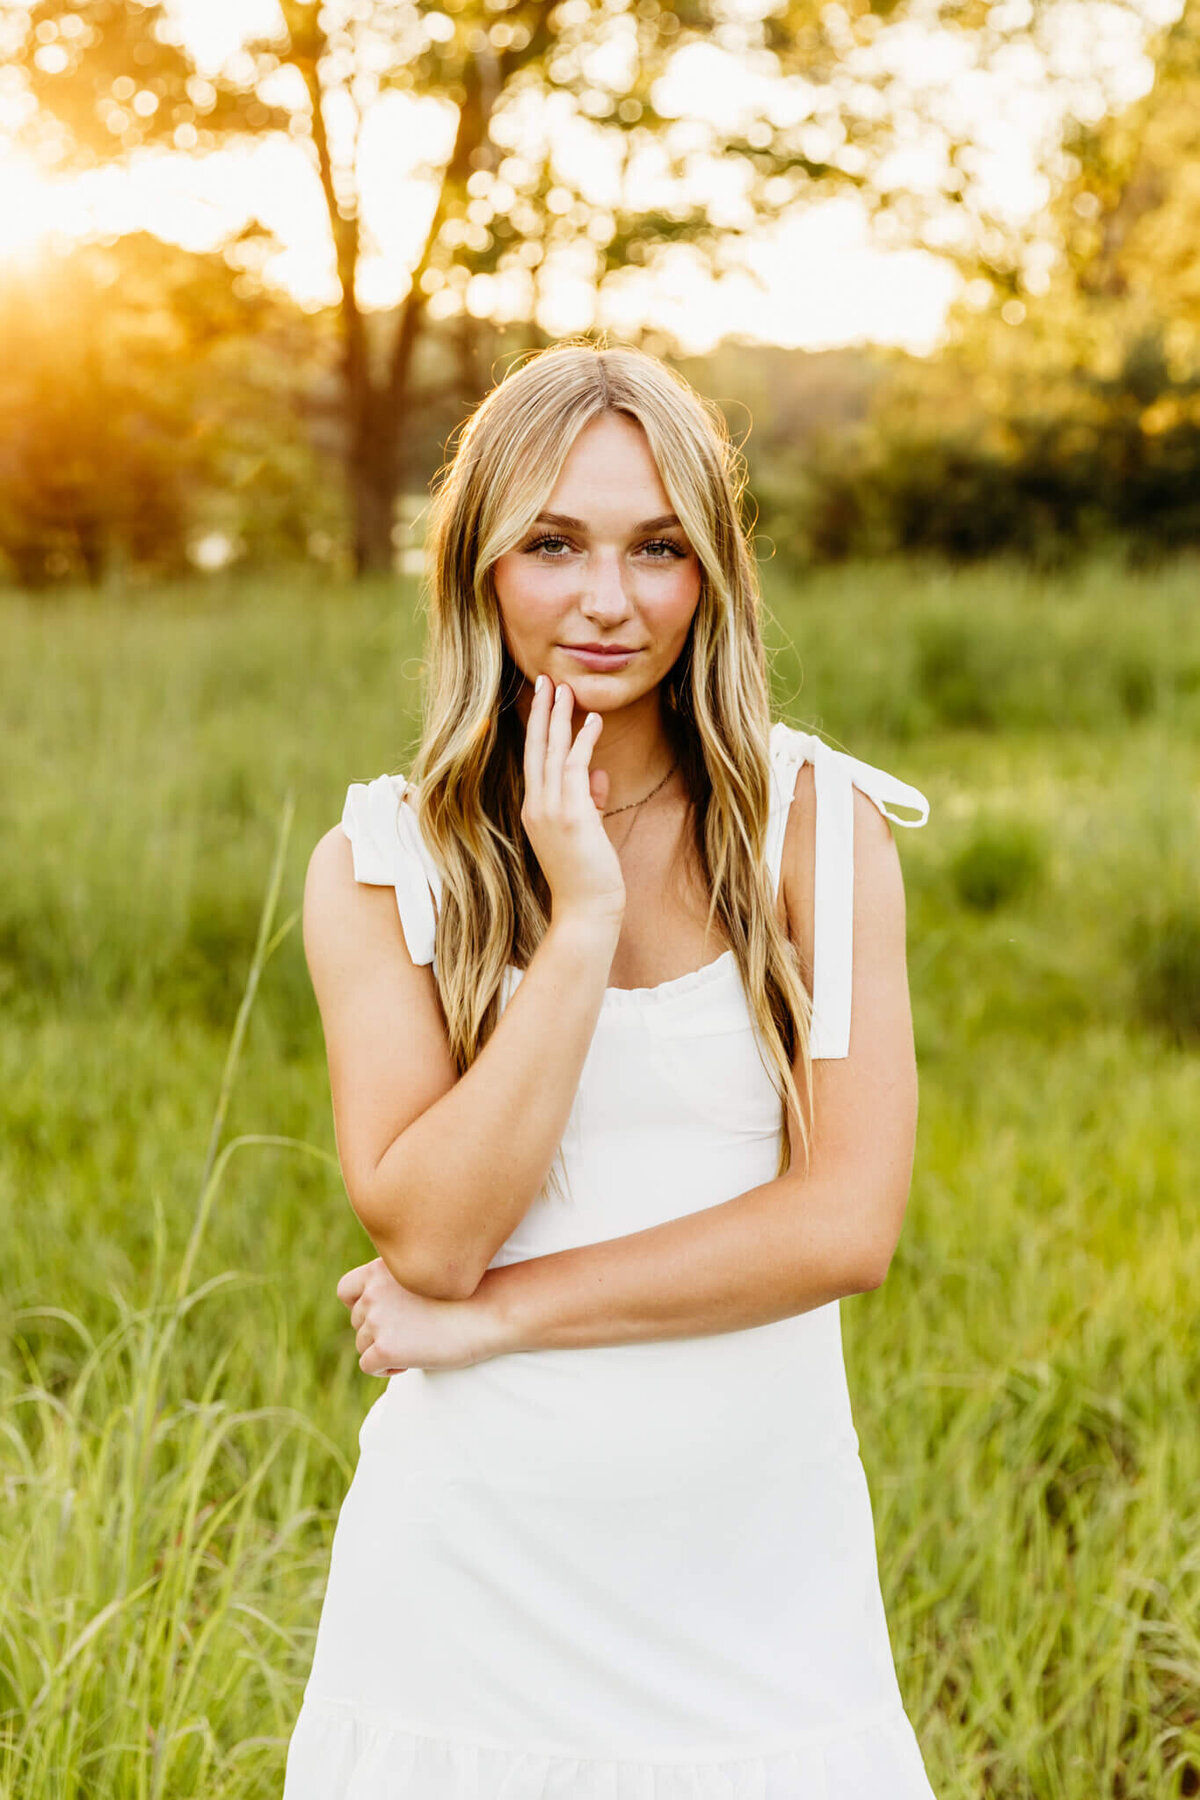 young woman looking serious in a white dress while standing in vibrant green grass for her high school senior photos by Ashley Kalbus